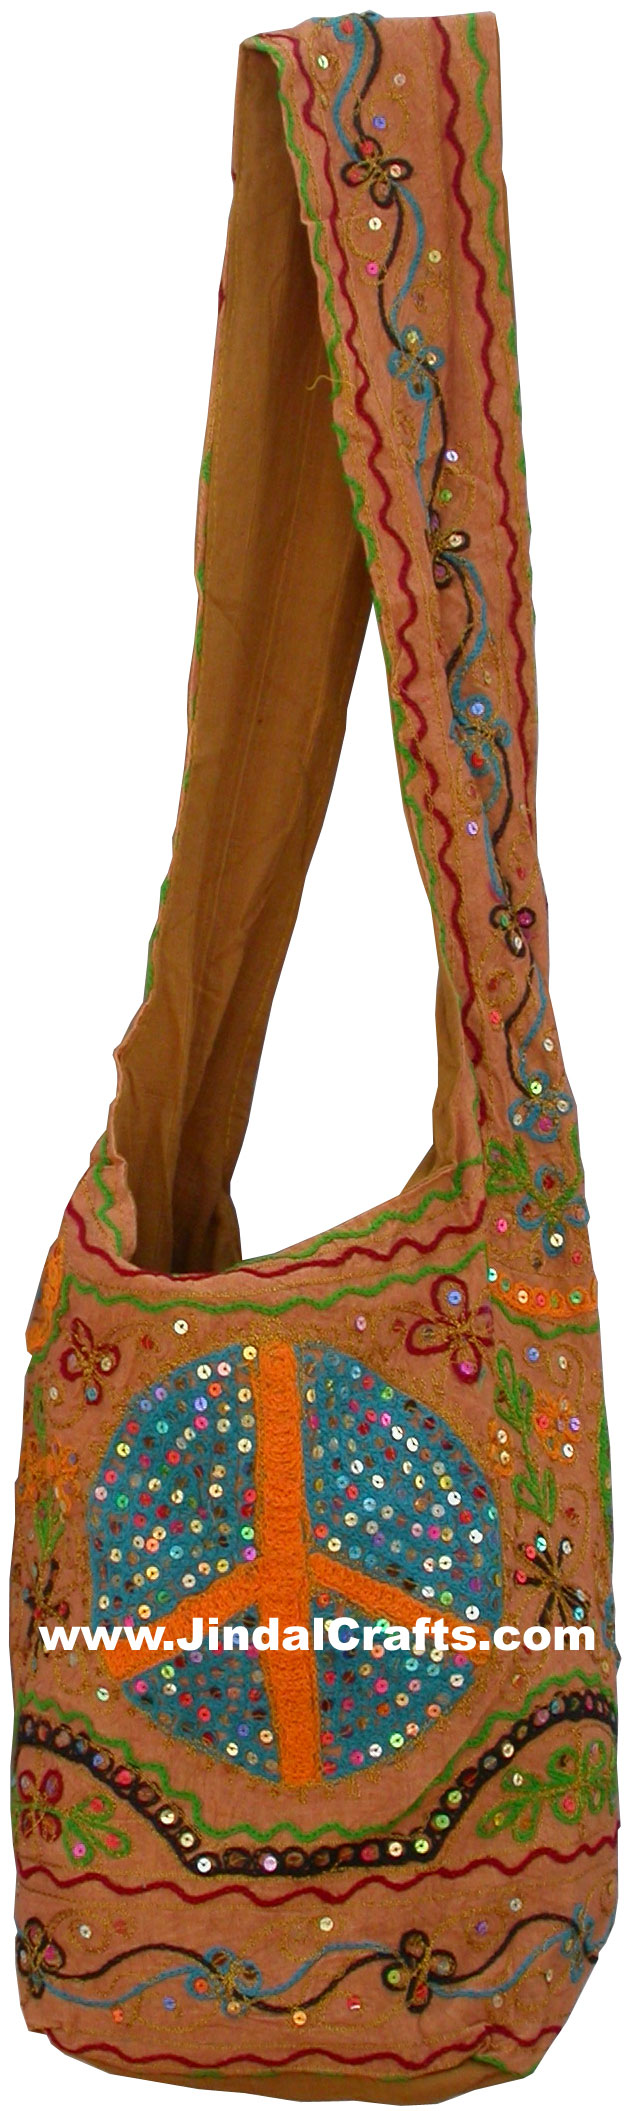 Colourful Hand Embroidered Sun Handbag from India 100 % Cotton Fabric Art